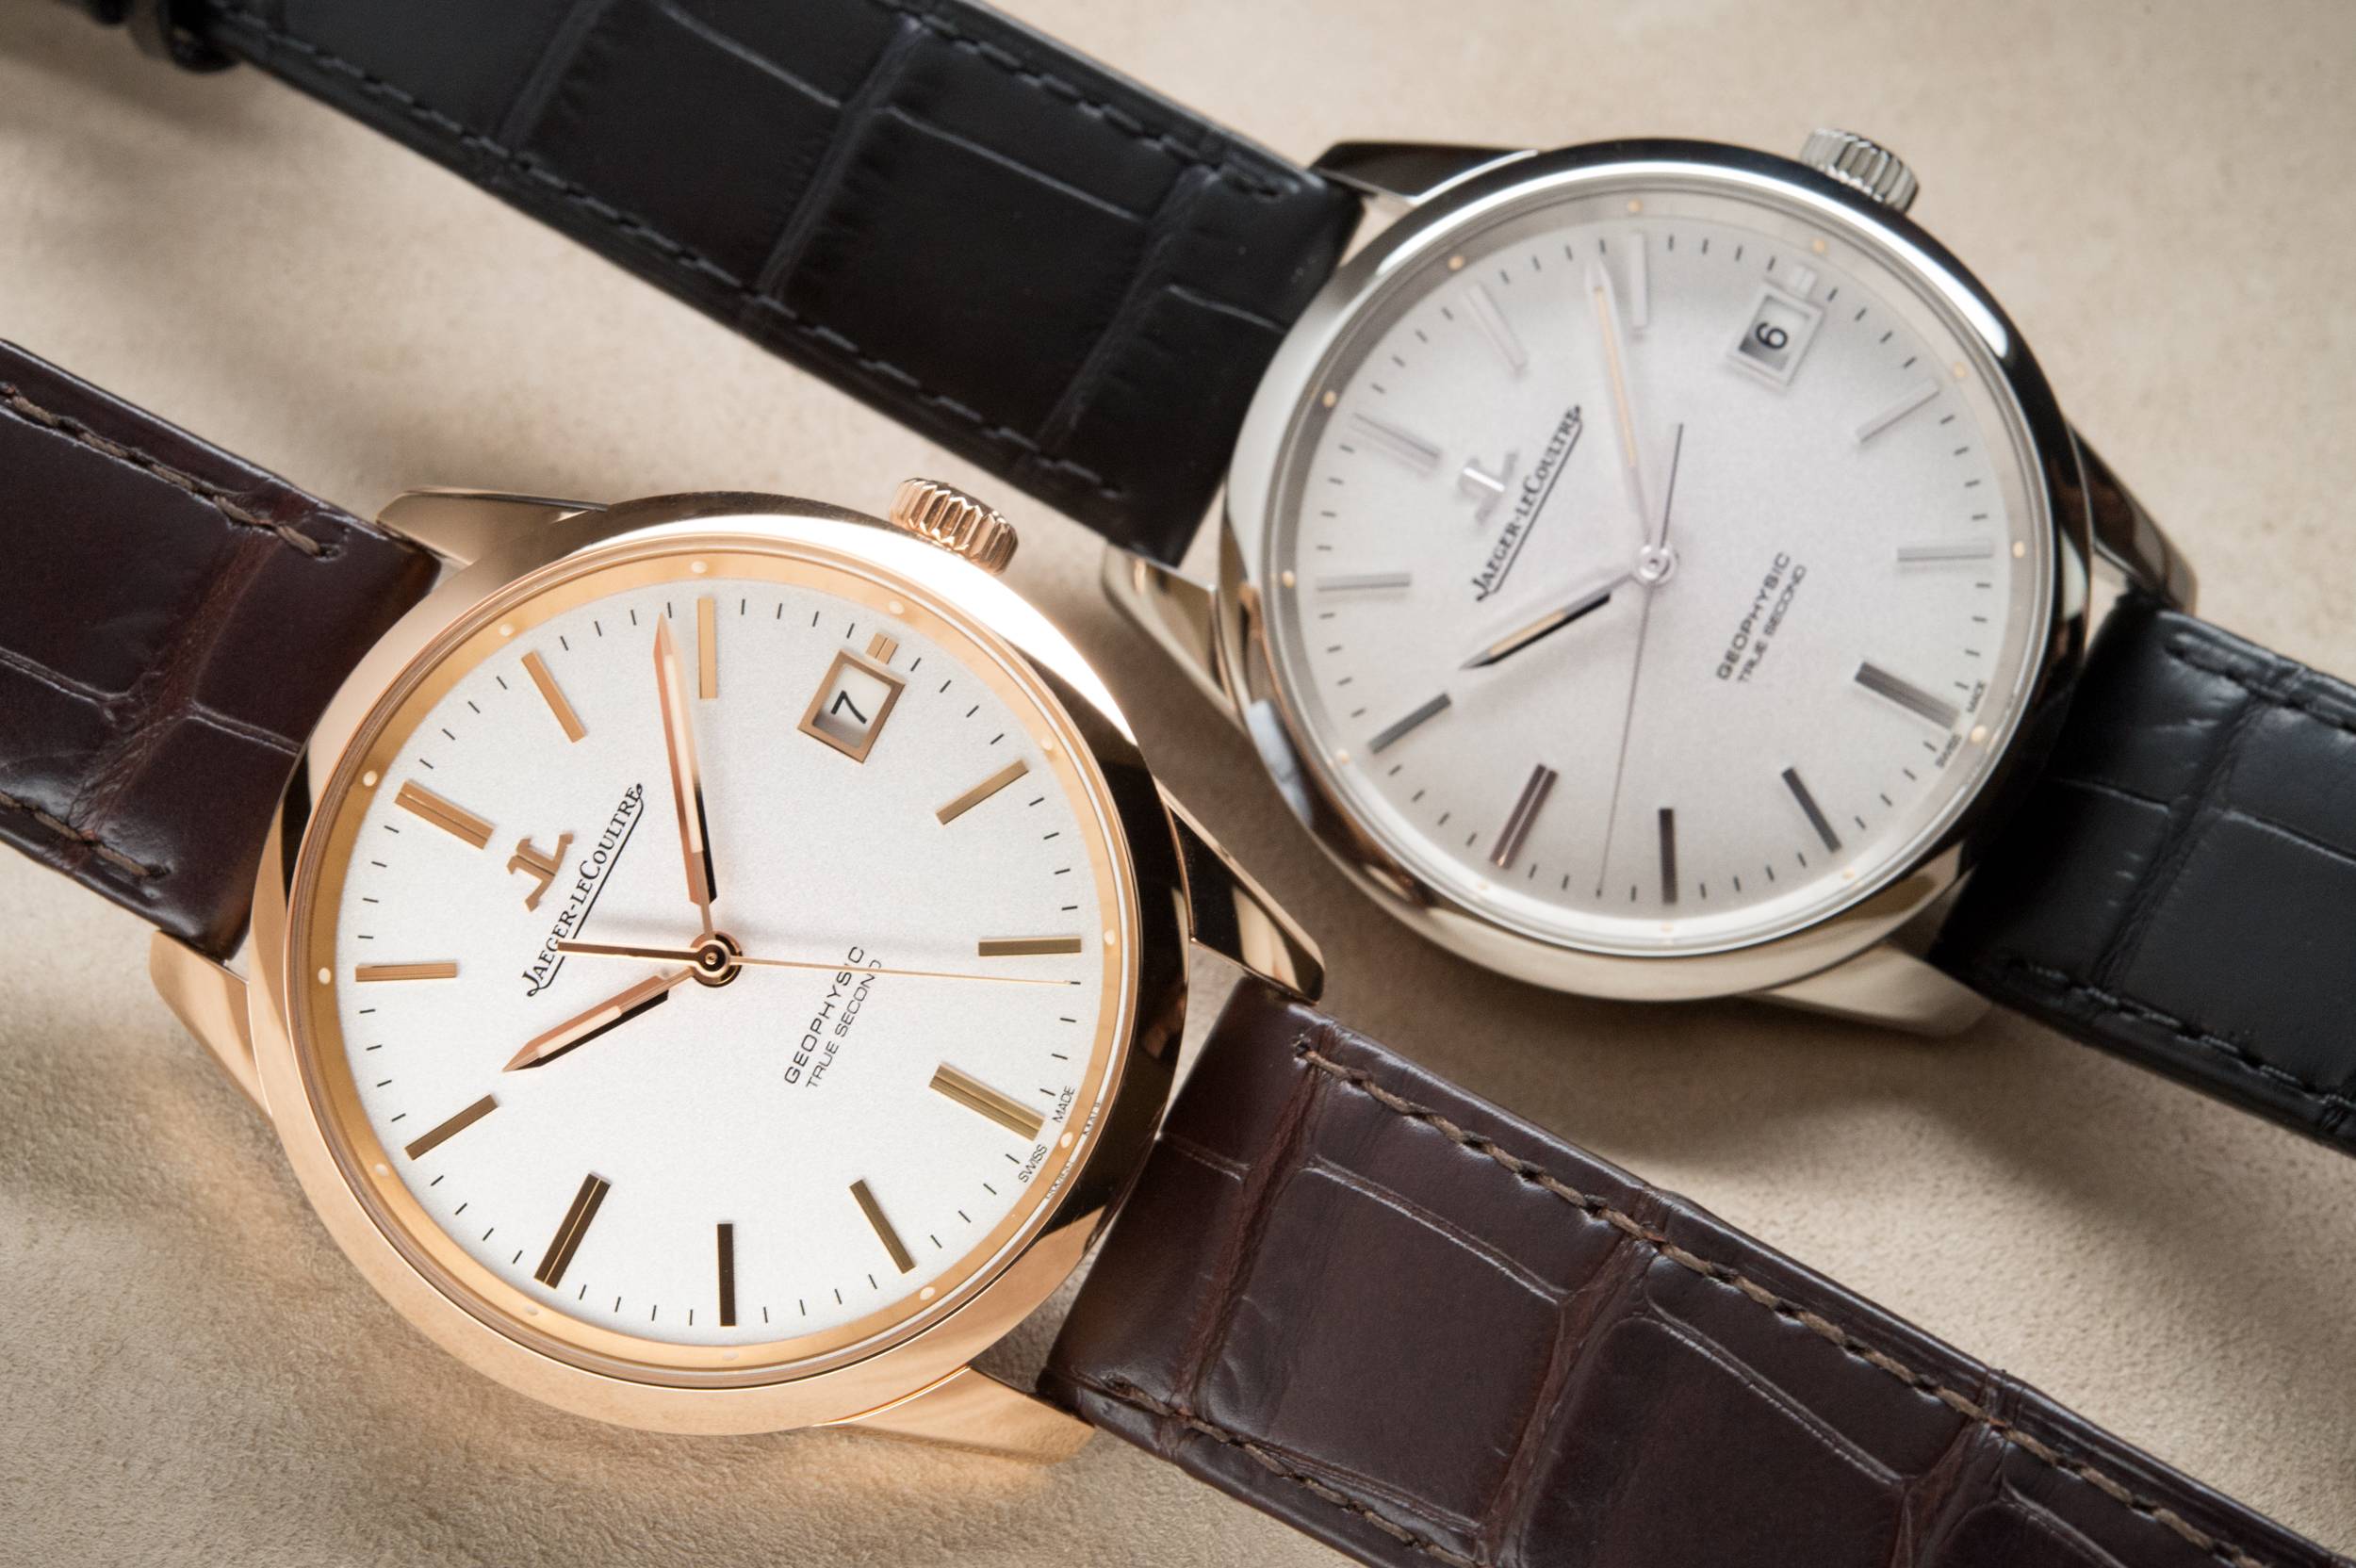 Introducing The Jaeger-LeCoultre Geophysic True Second